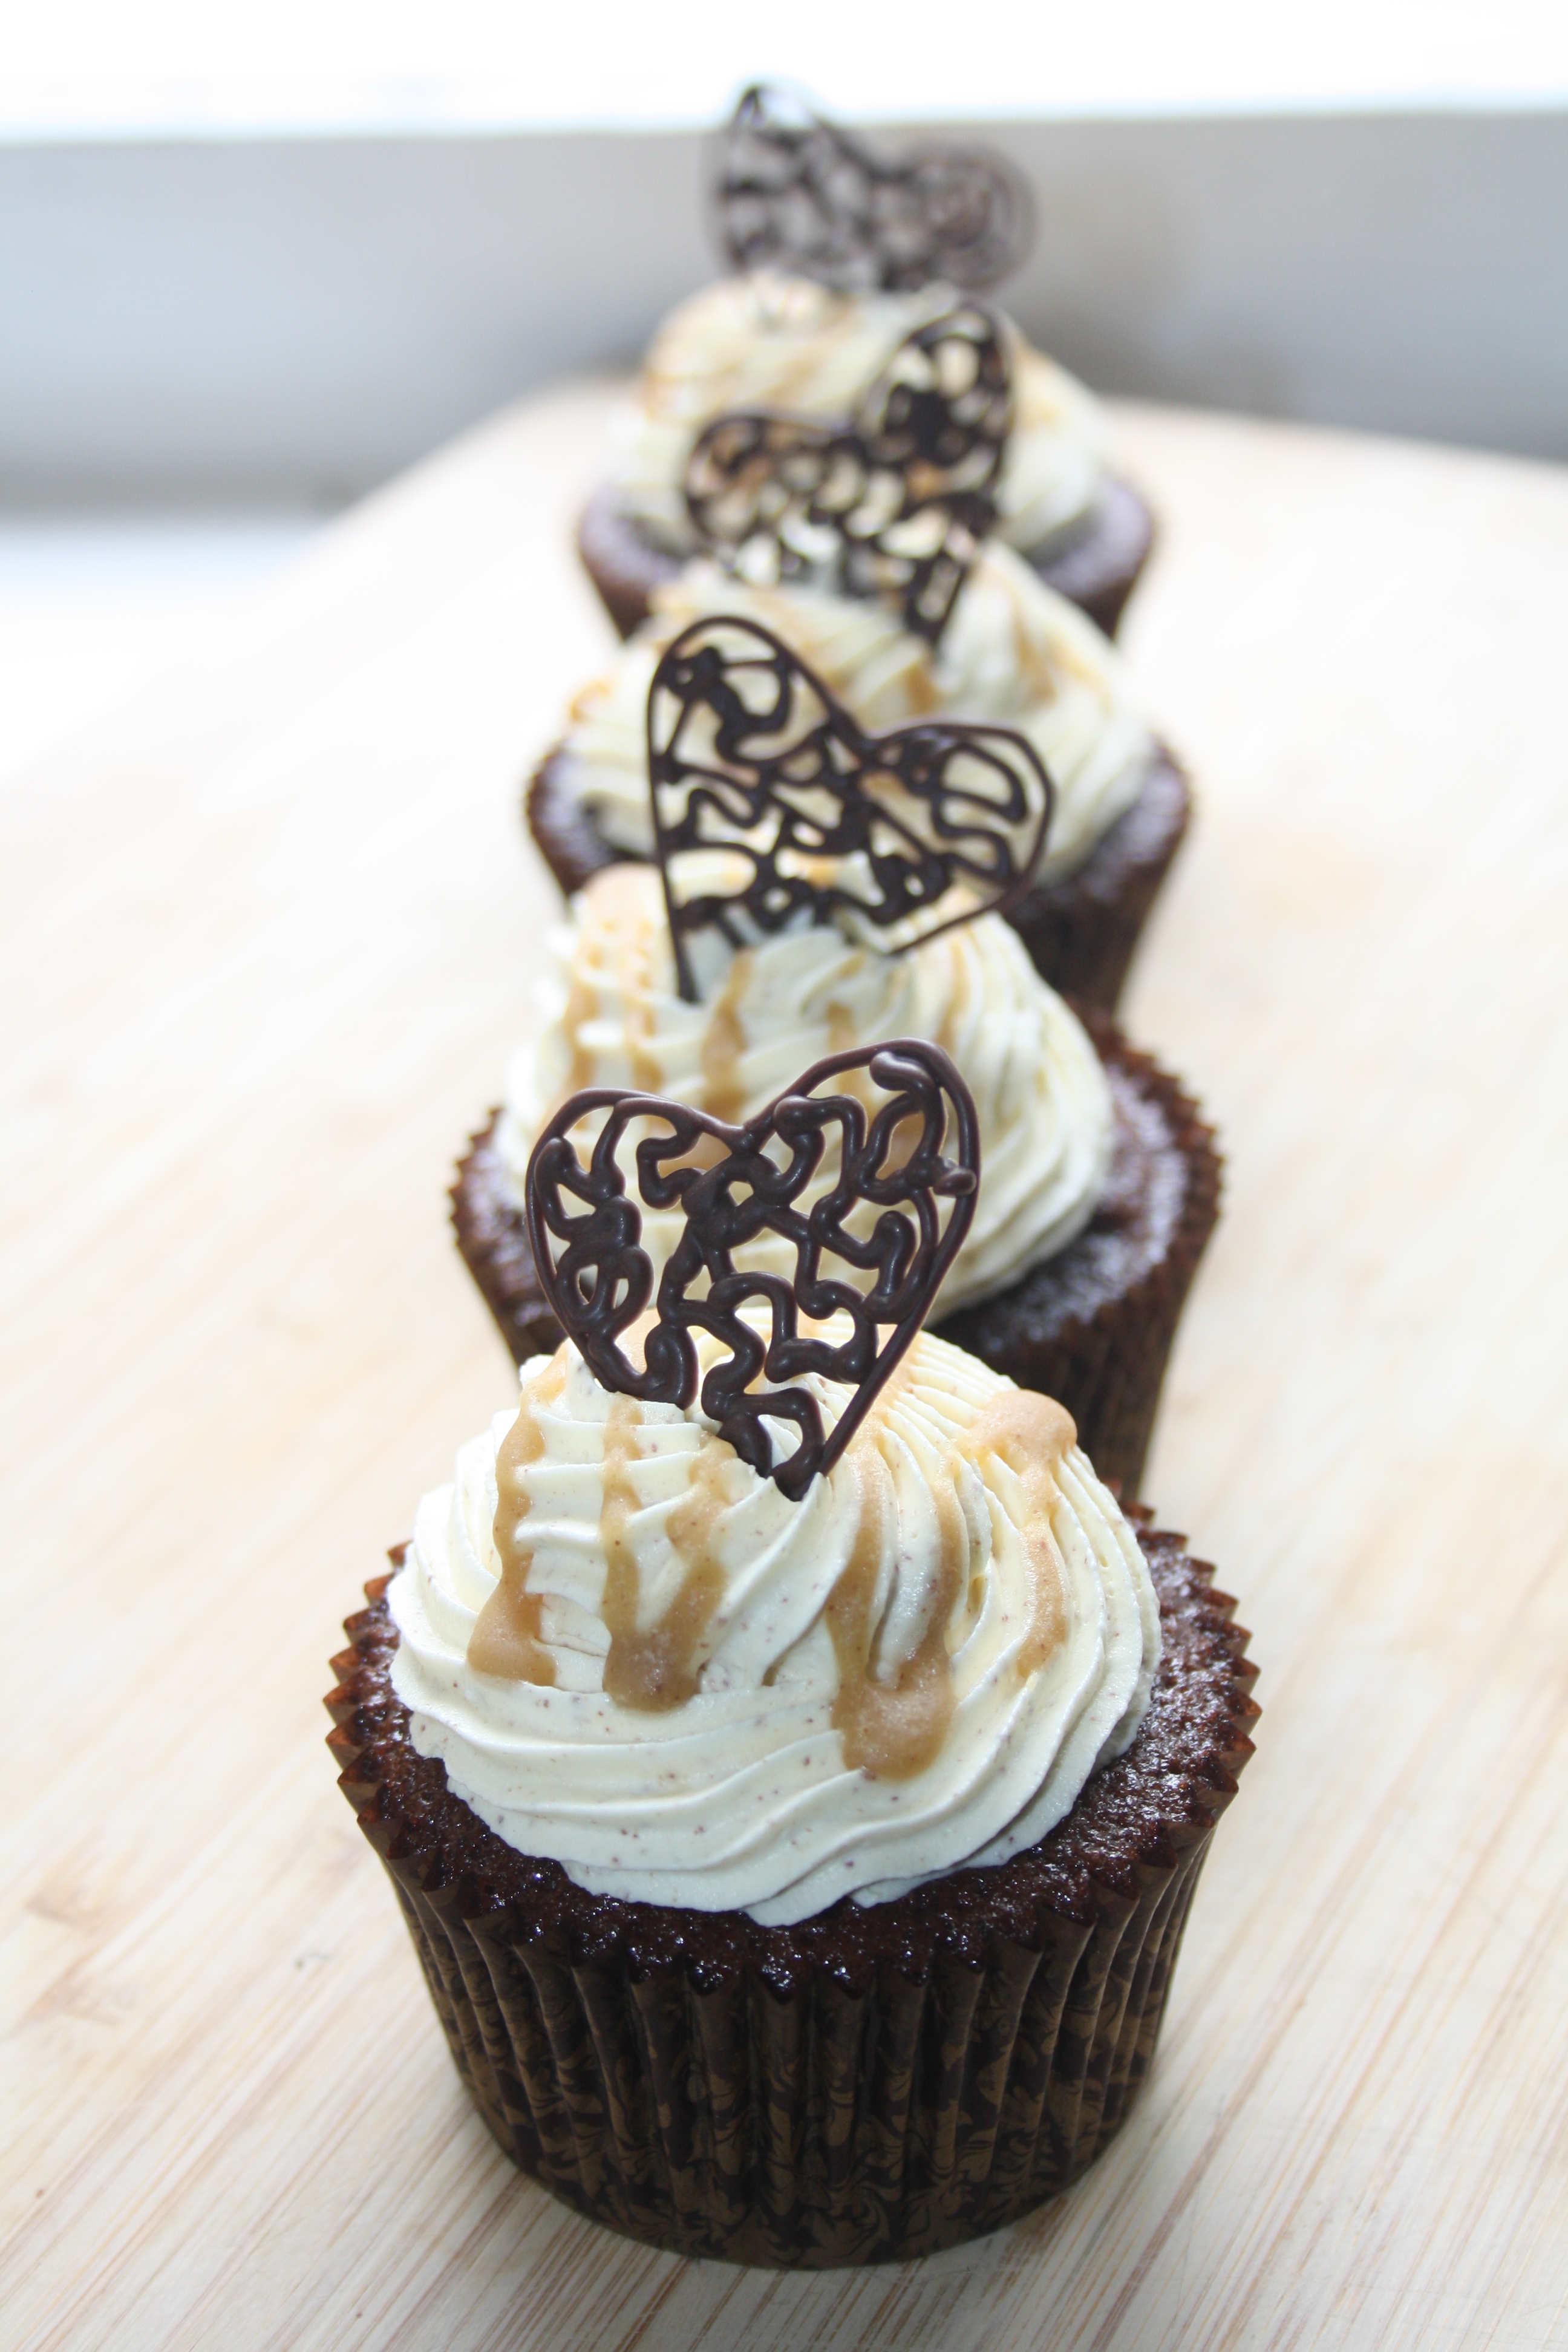 Chocolate Caramel Cupcakes with Brown Butter Icing and Filigree Hearts | Torte - The Blog2592 x 3888